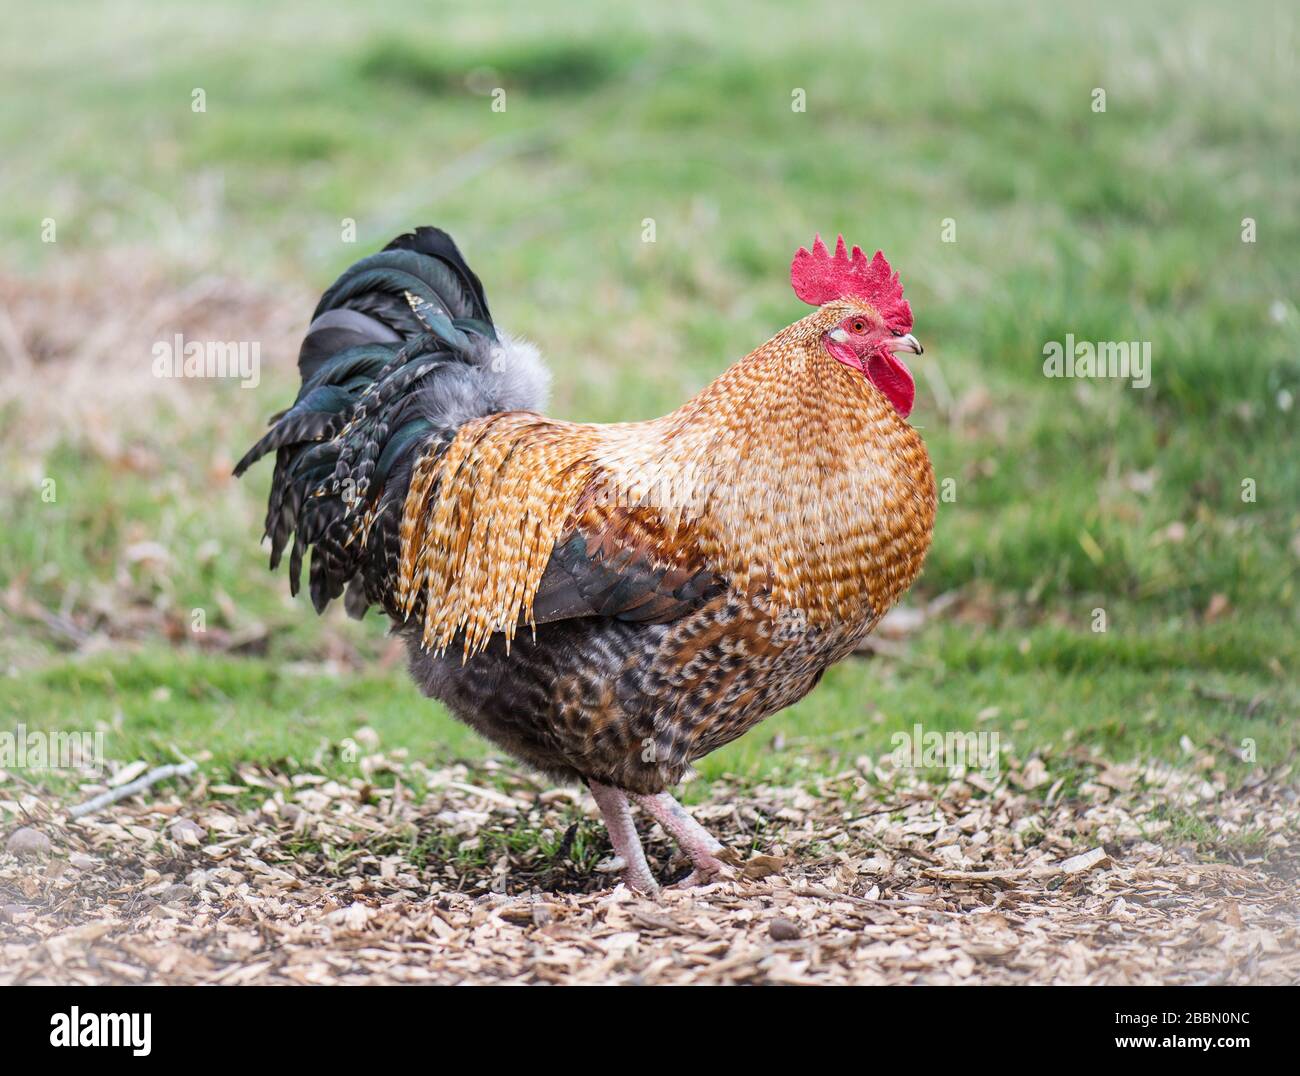 Beautiful close up of a cockerel at a farm in Norfolk, England Stock Photo